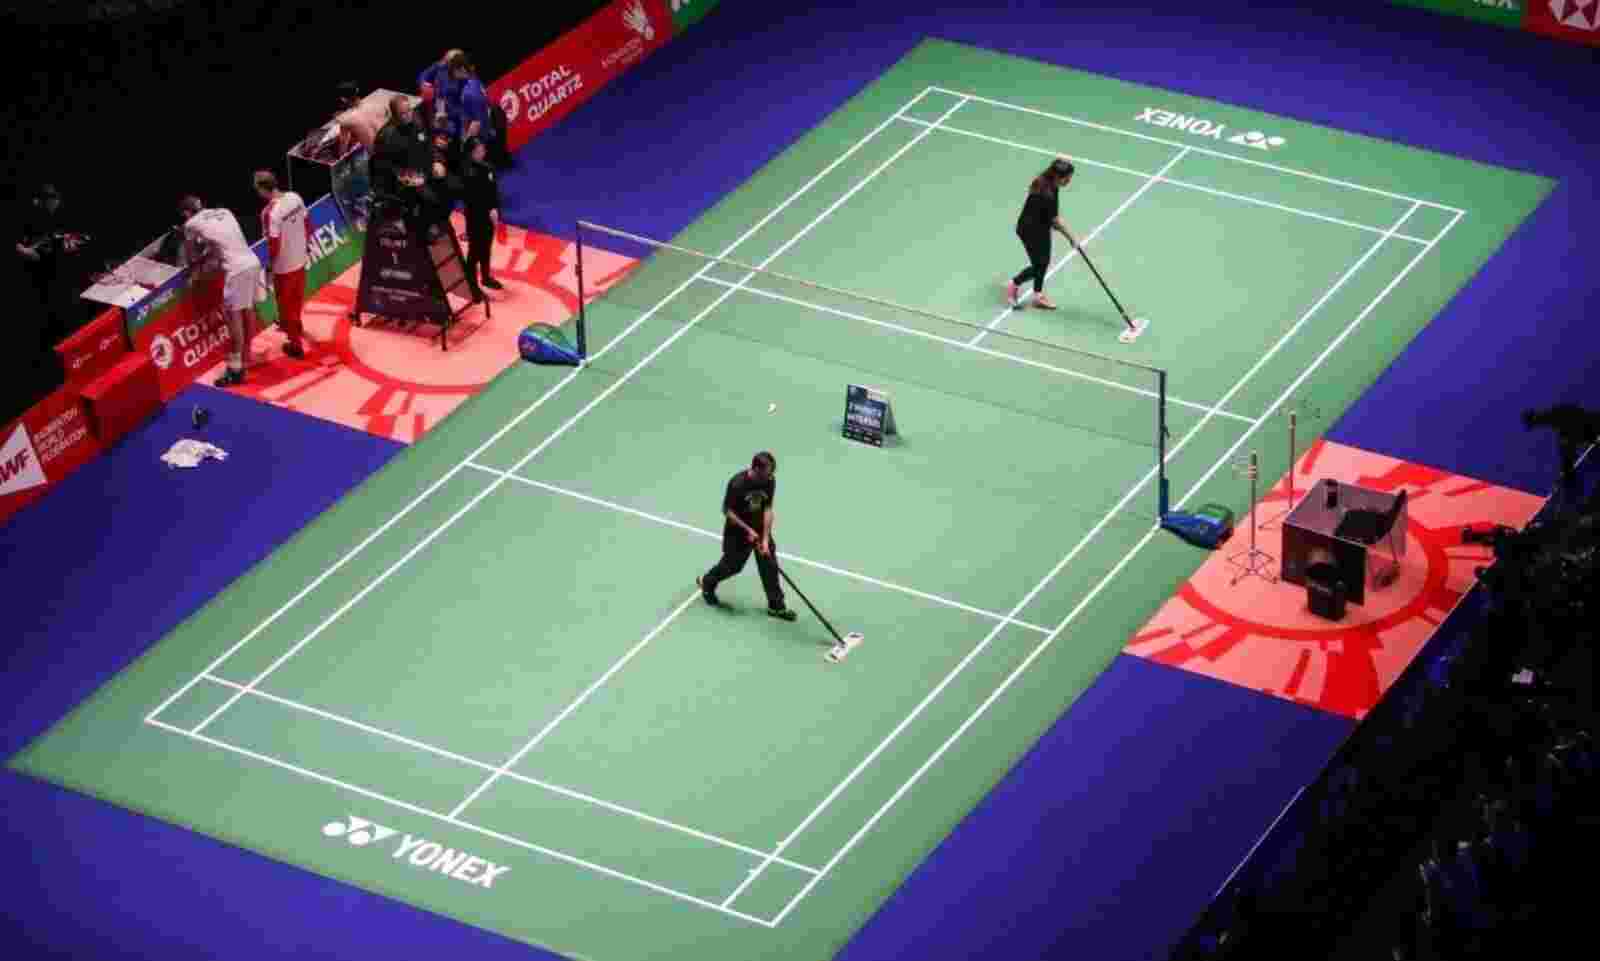 Start of All England Badminton Open delayed due to inconclusive COVID reports